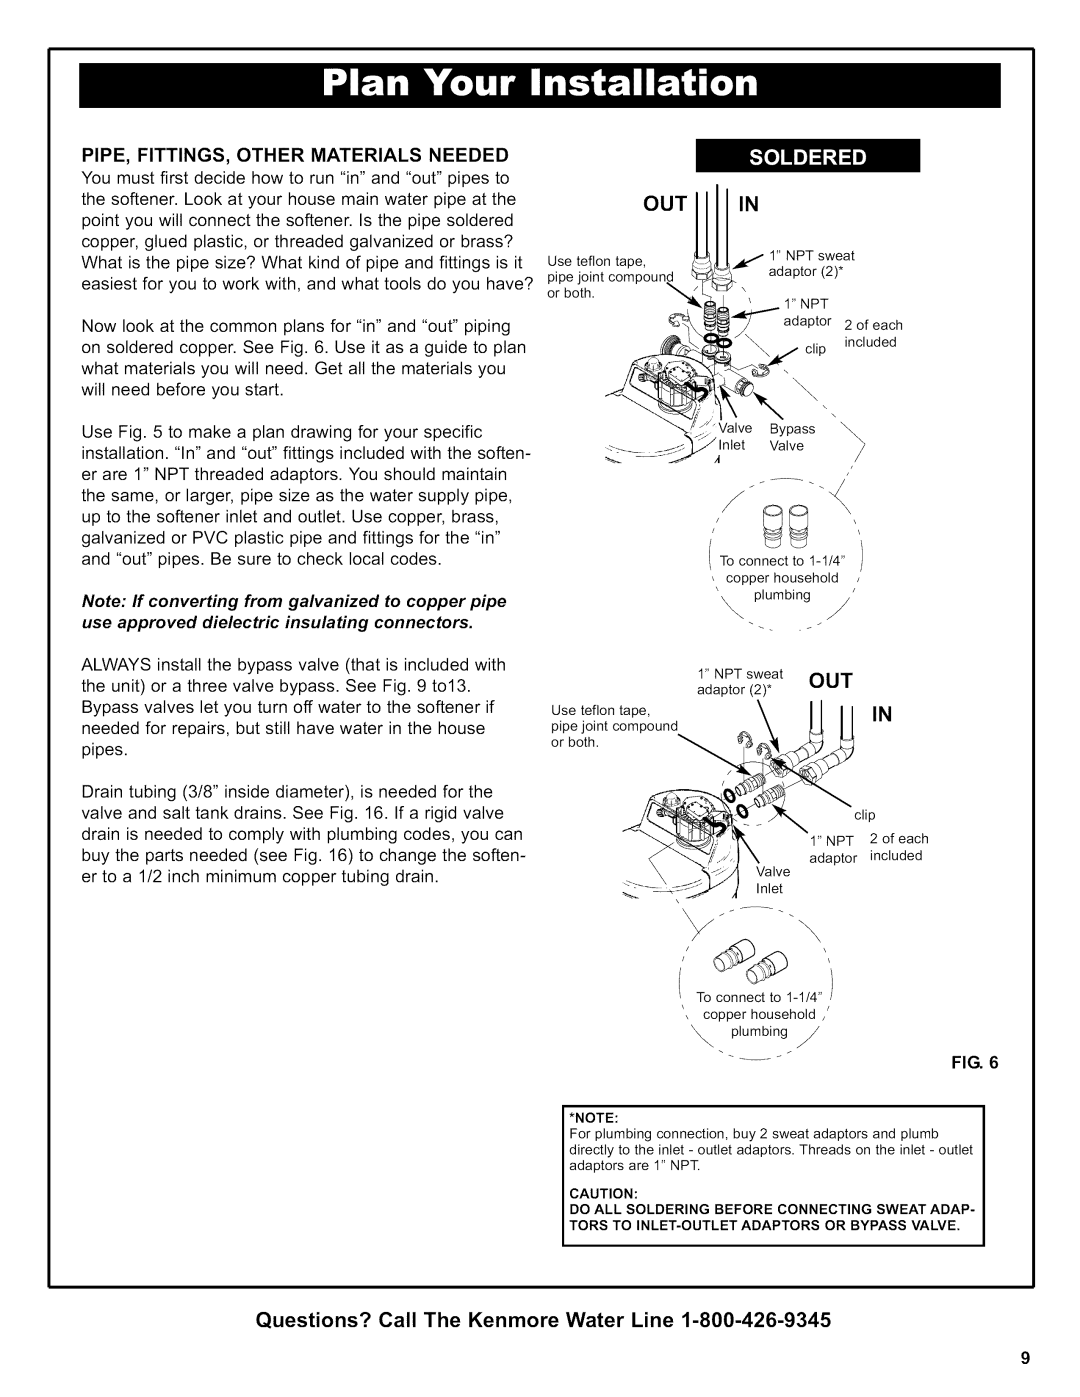 Kenmore 625.38376 owner manual Out In, Questions? Call The Kenmore Water Line, Toconnect to 1-1/4, To connect to 1-1/4 